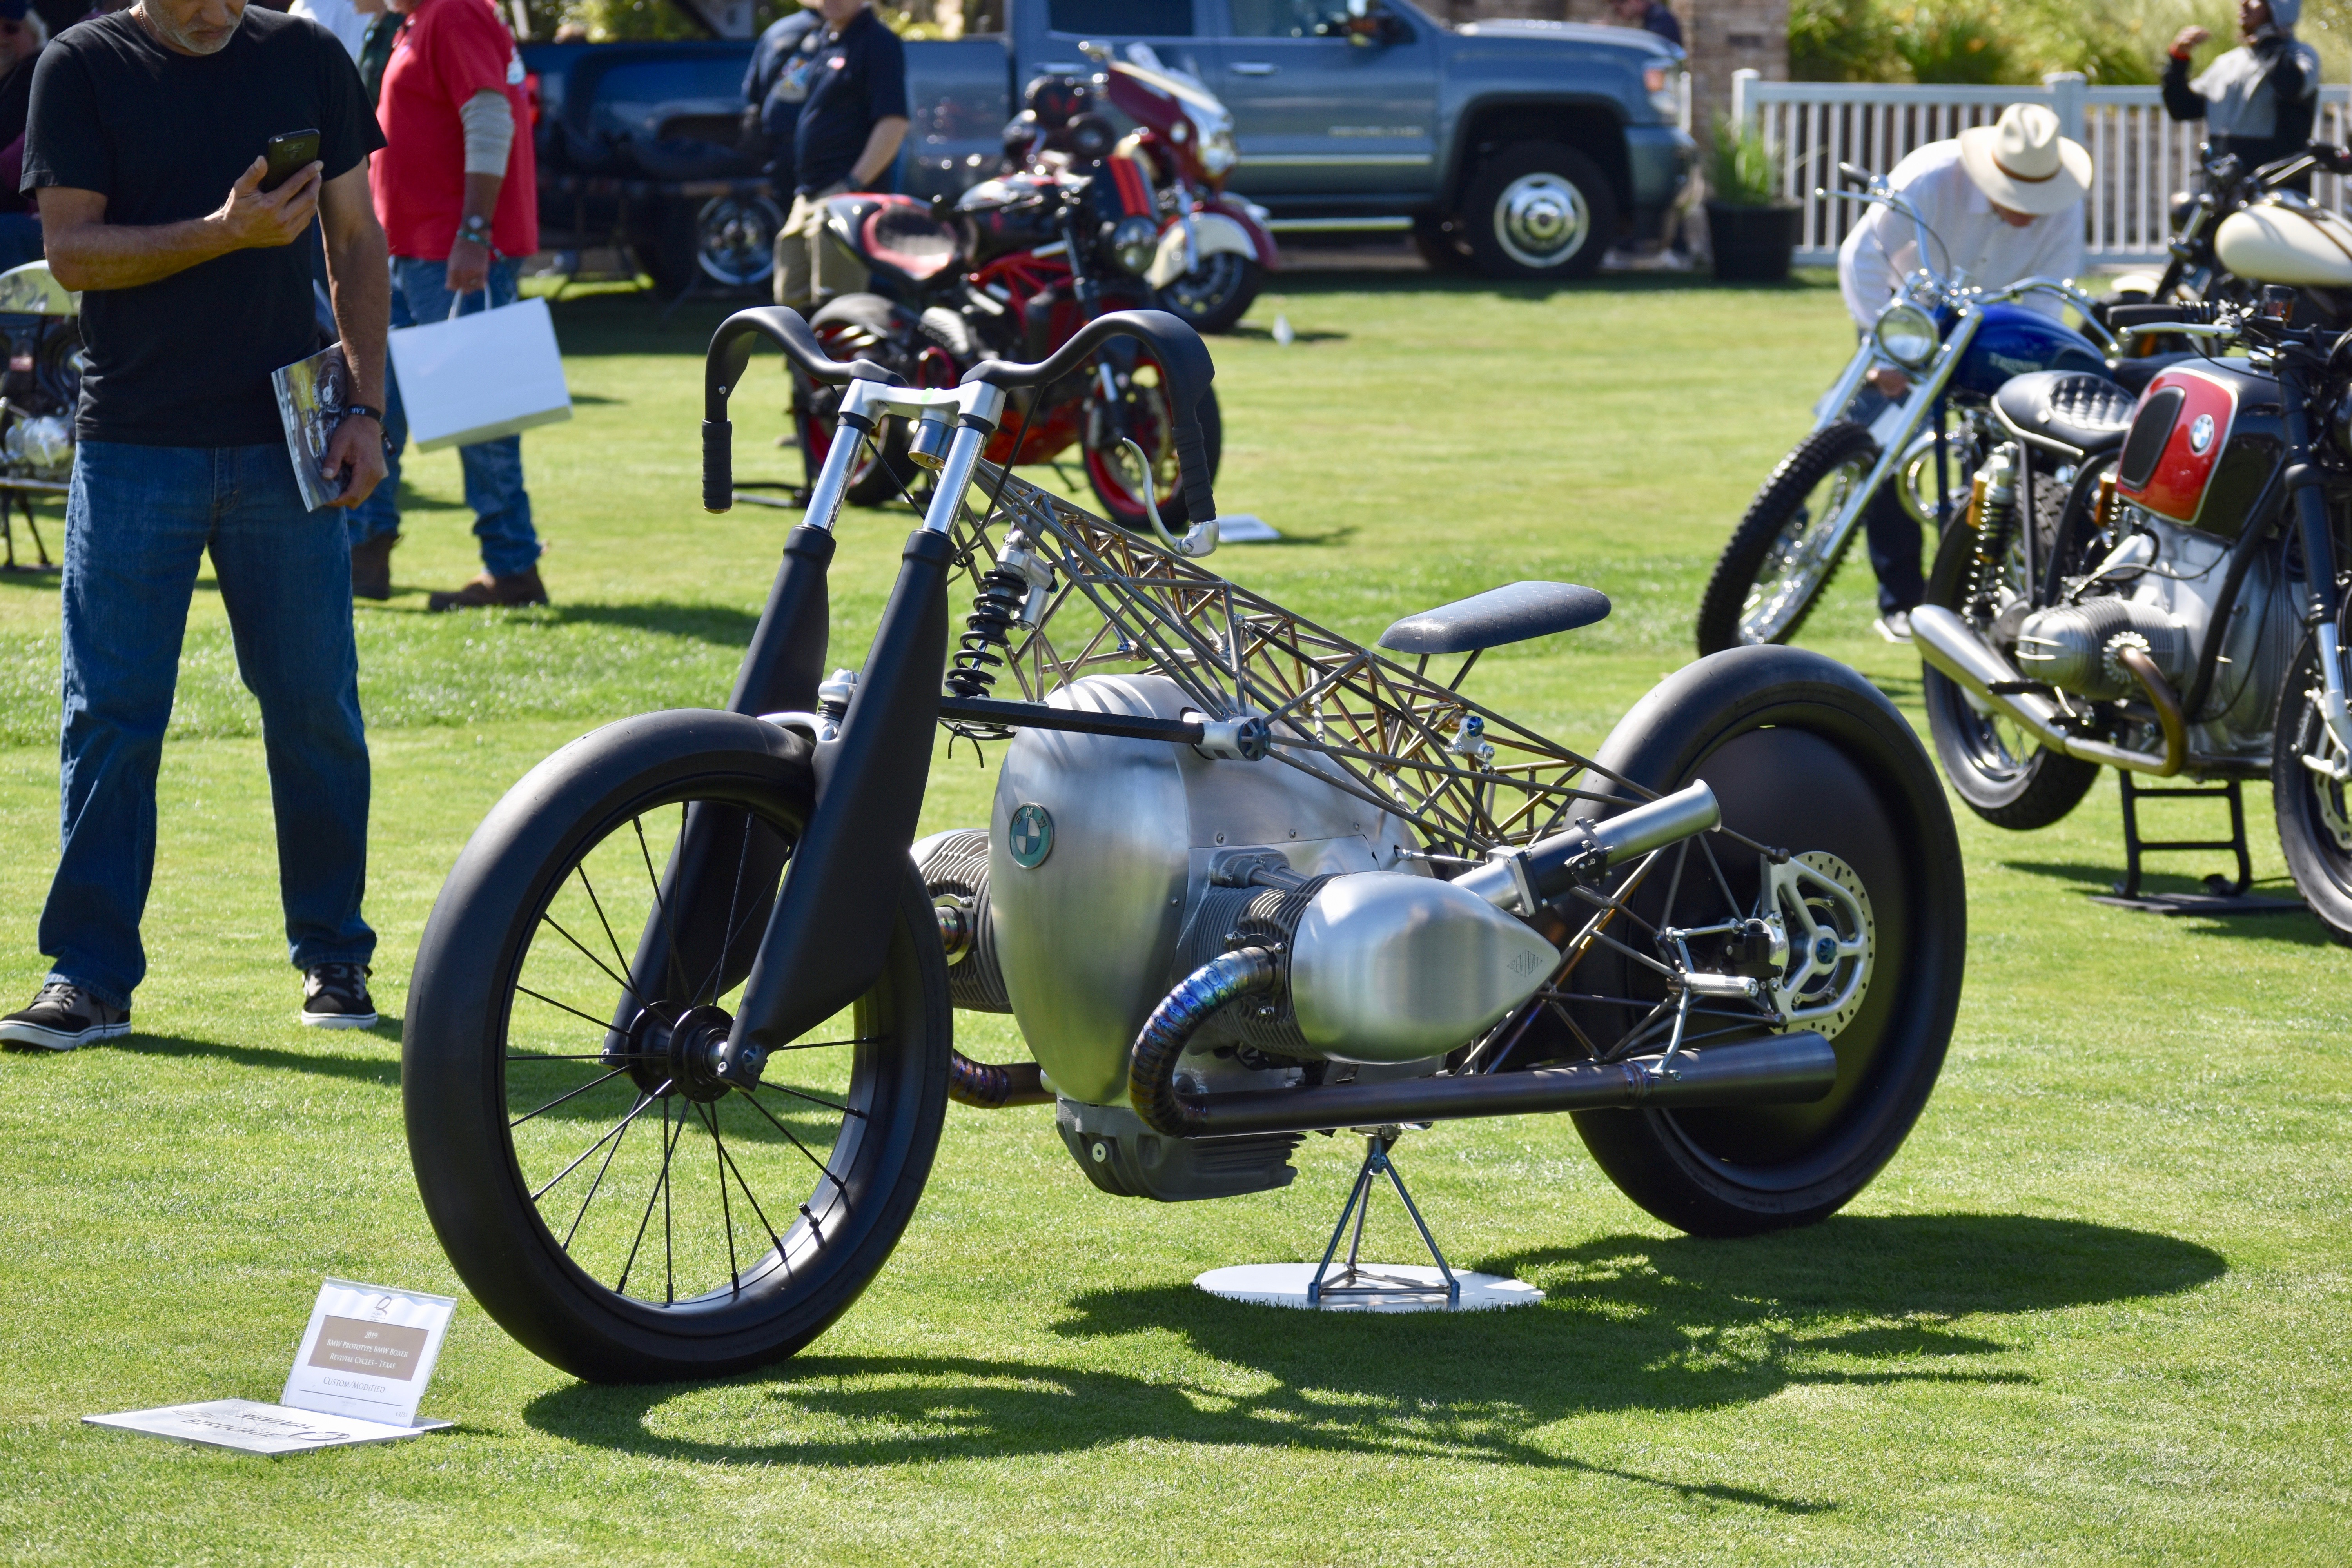 Concours, Philadelphia concours, Quail motorcycle gathering canceled, ClassicCars.com Journal